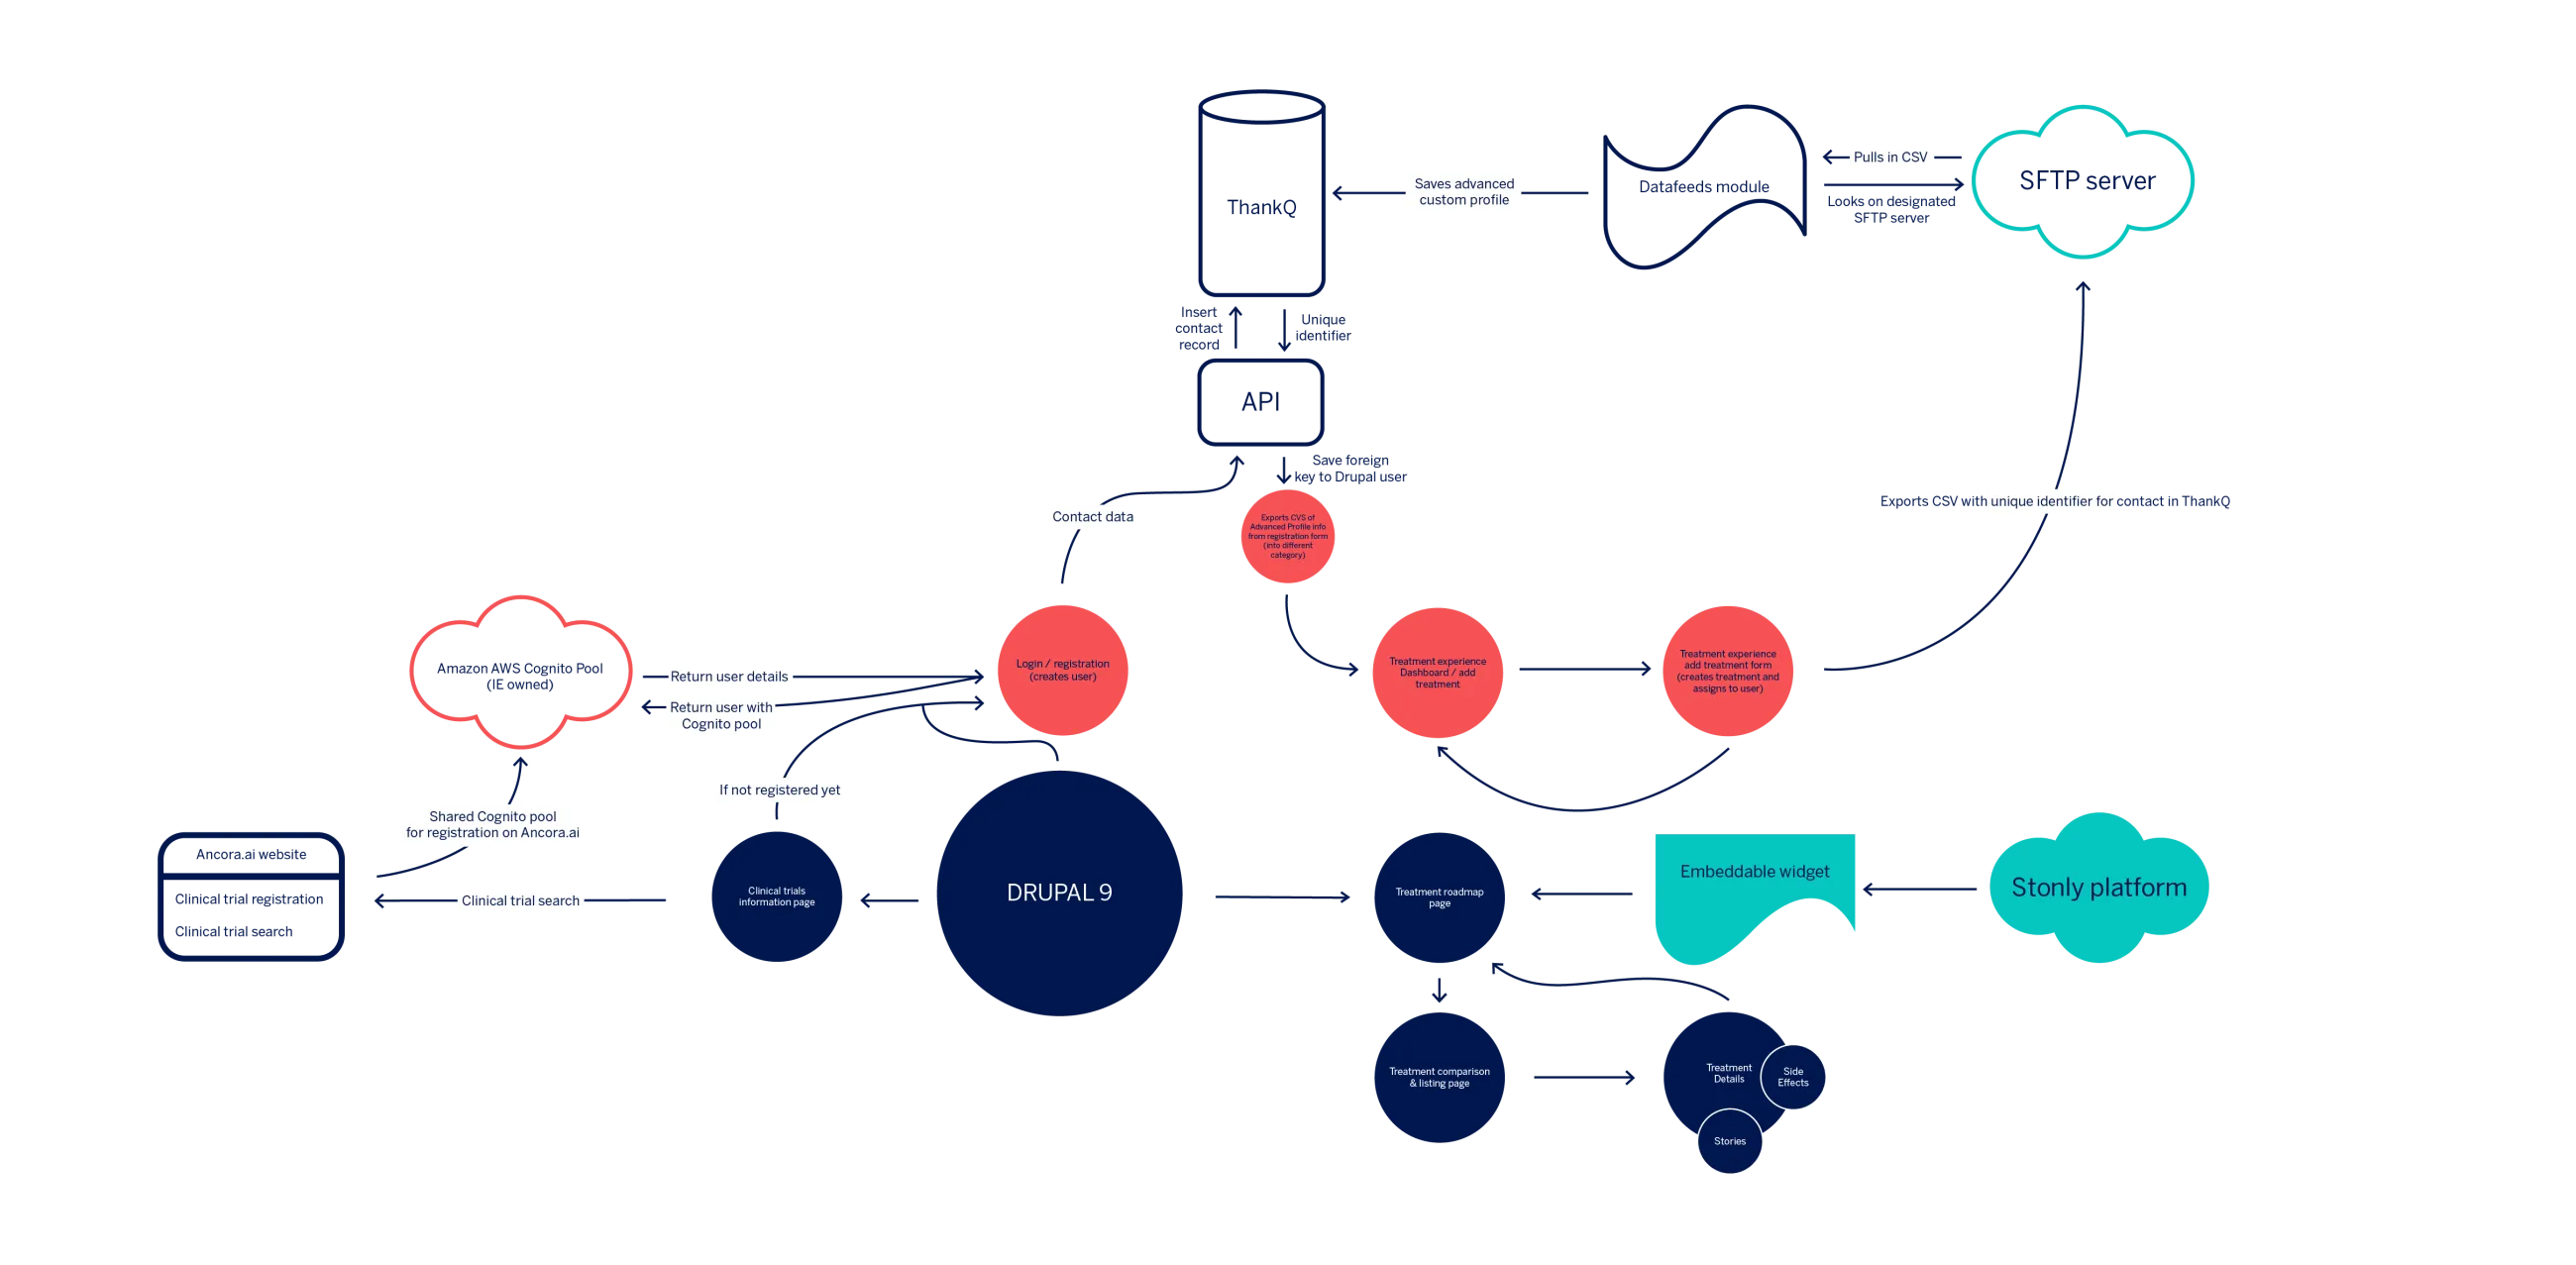 Diagram showing the system architecture and integrations mapping for the Infopool website. Shows the relationship between Drupal, Stonly Platform, the CRM system ThankQ, and the clinical trials finder application, Ancora.ai.